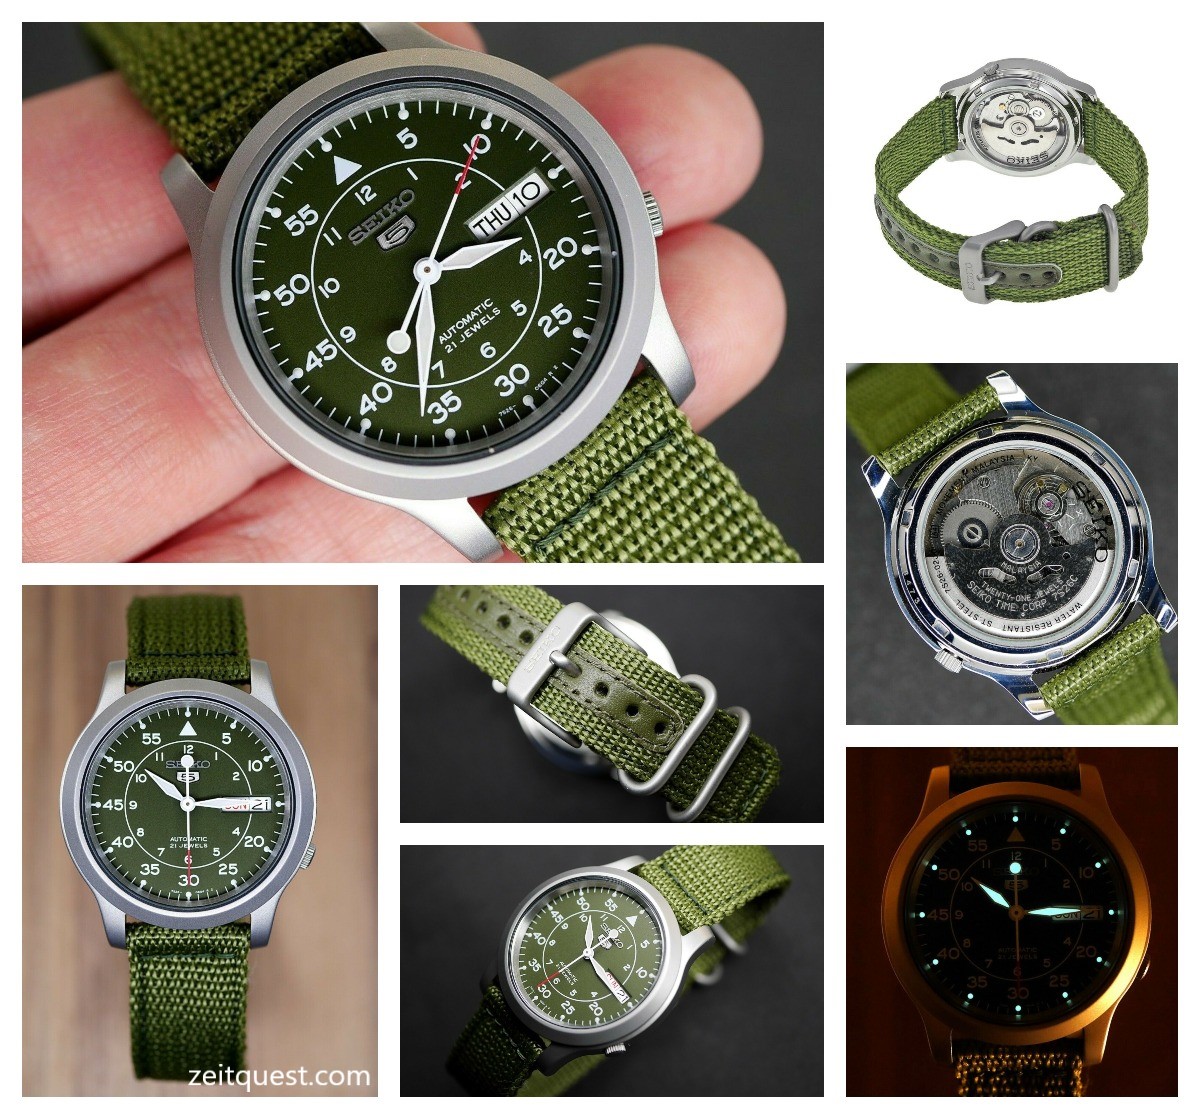 The military looking khaki Seiko SNK805, sold on ebay by military.inc